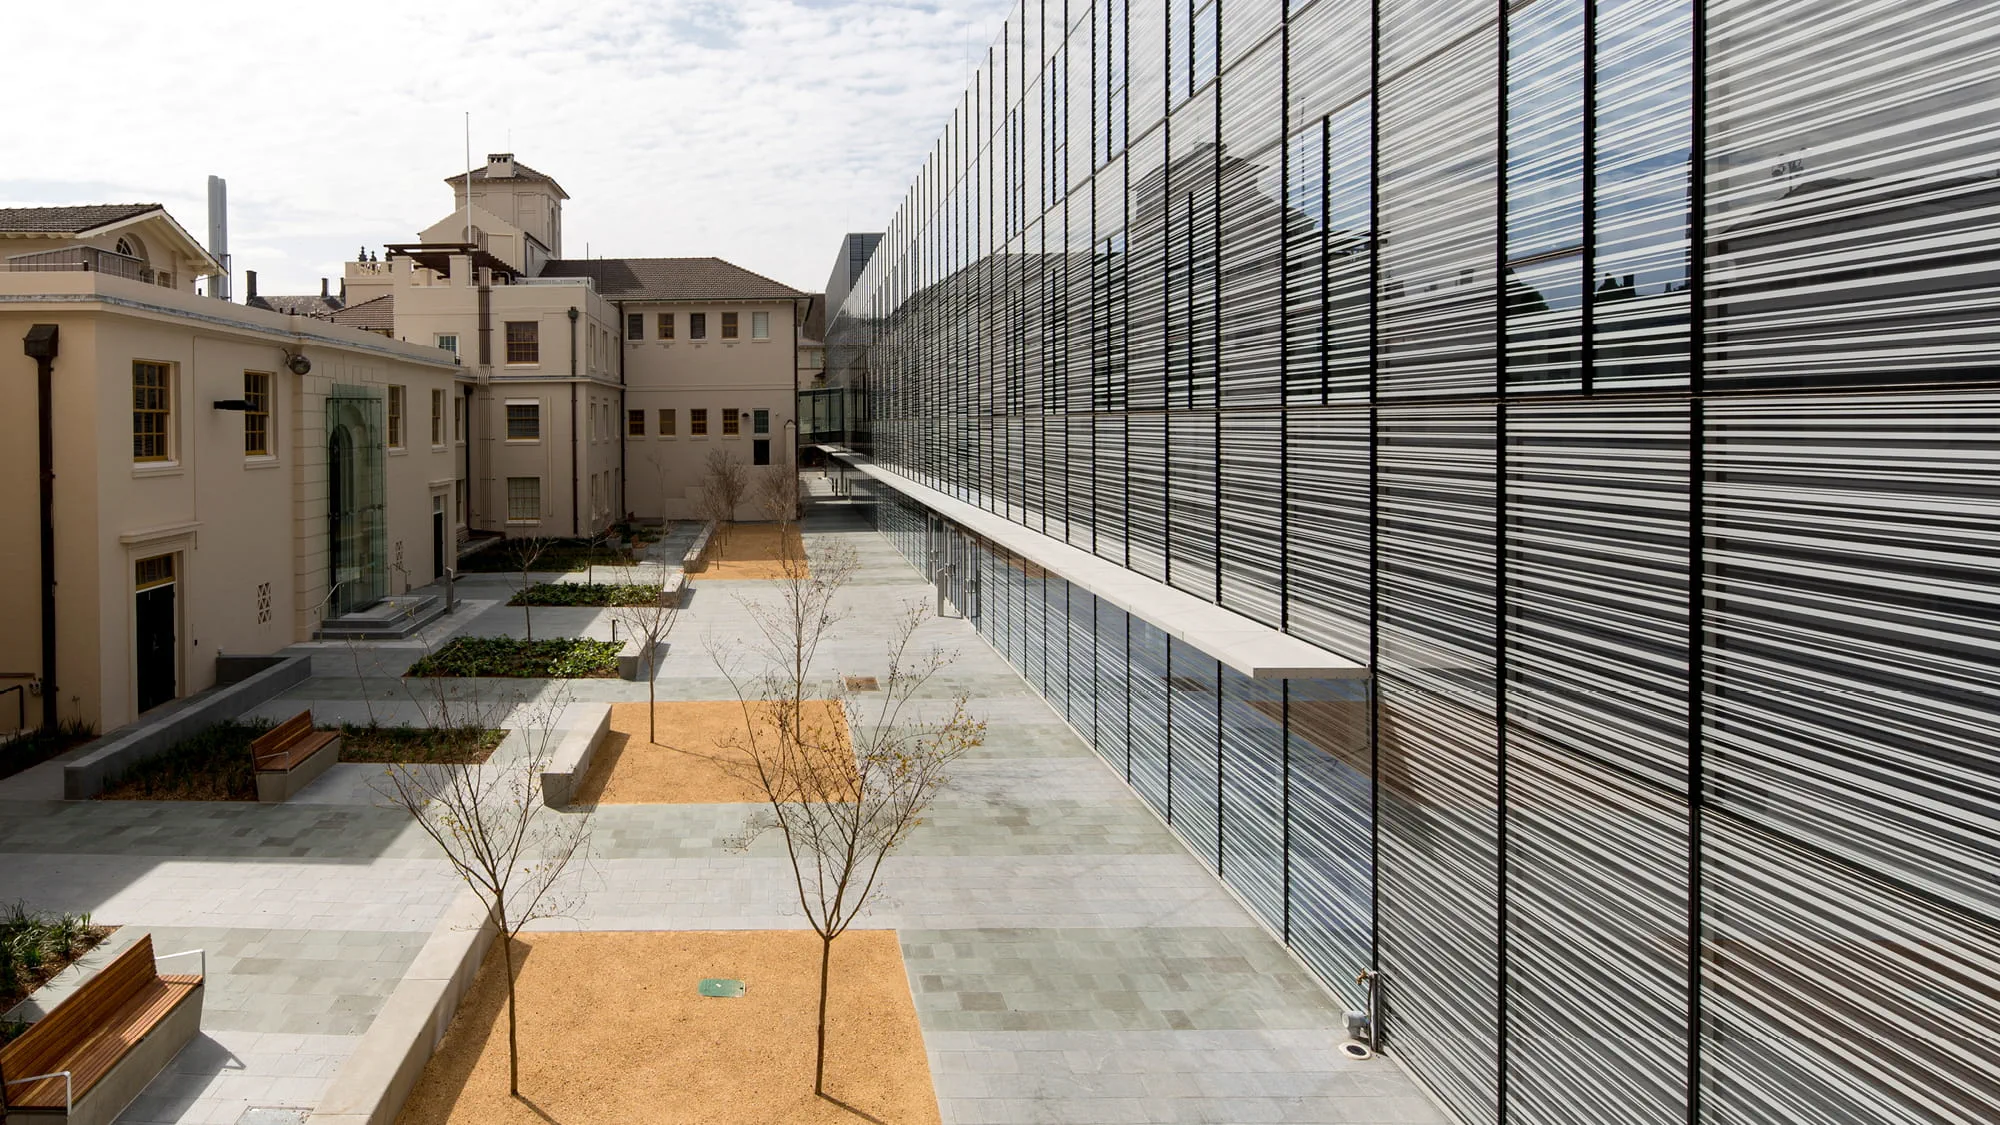 Exterior and courtyard of the nanoscale research centre building and adjacent buildings